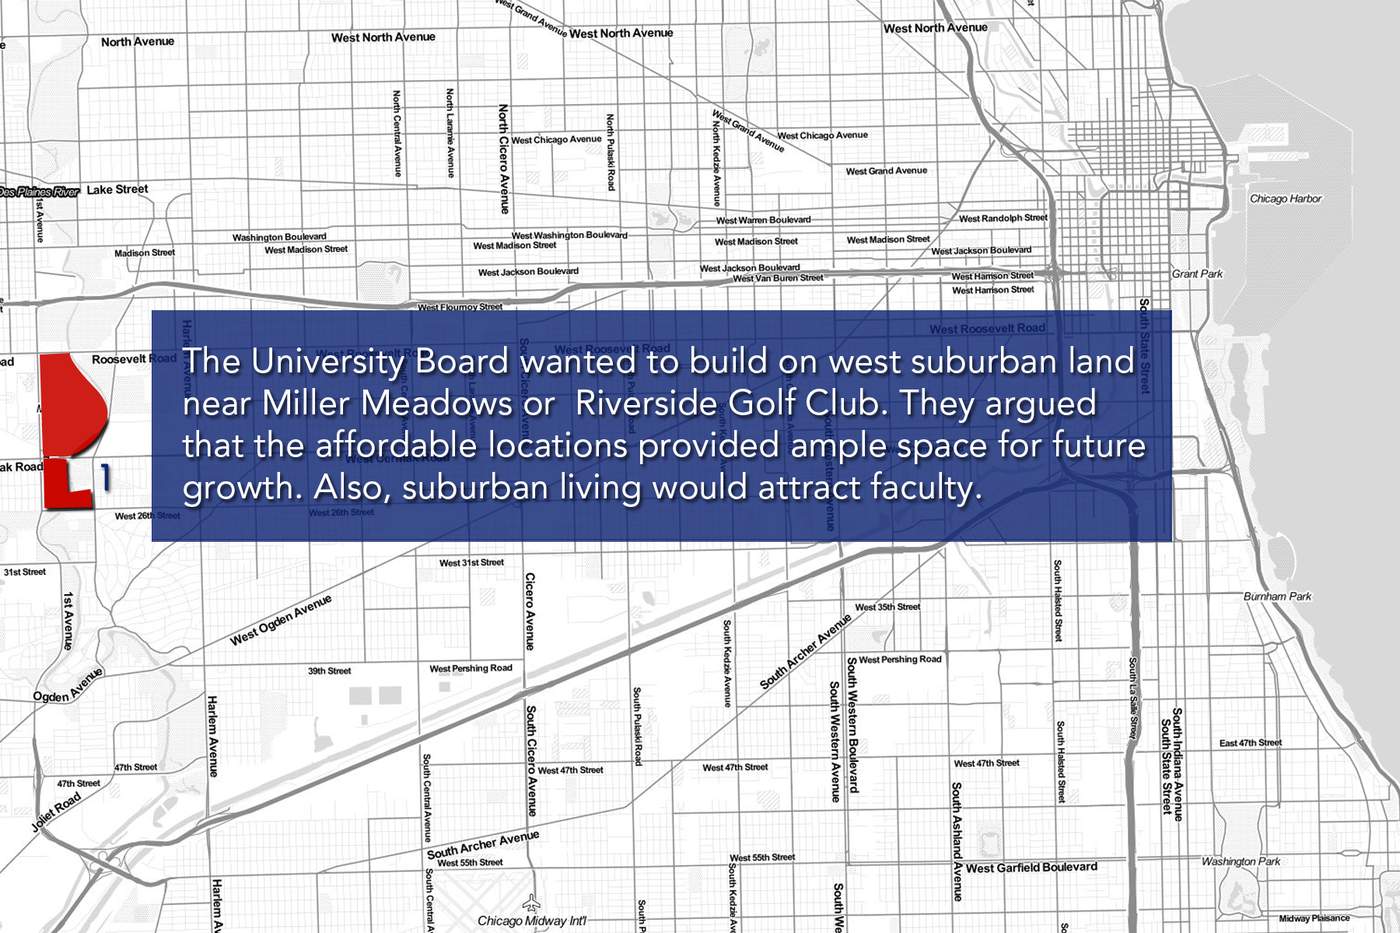 The University Board wanted to build on west suburban land near Miller Meadows or  Riverside Golf Club. They argued that the affordable locations provided ample space for future growth. Also, suburban living would attract faculty.